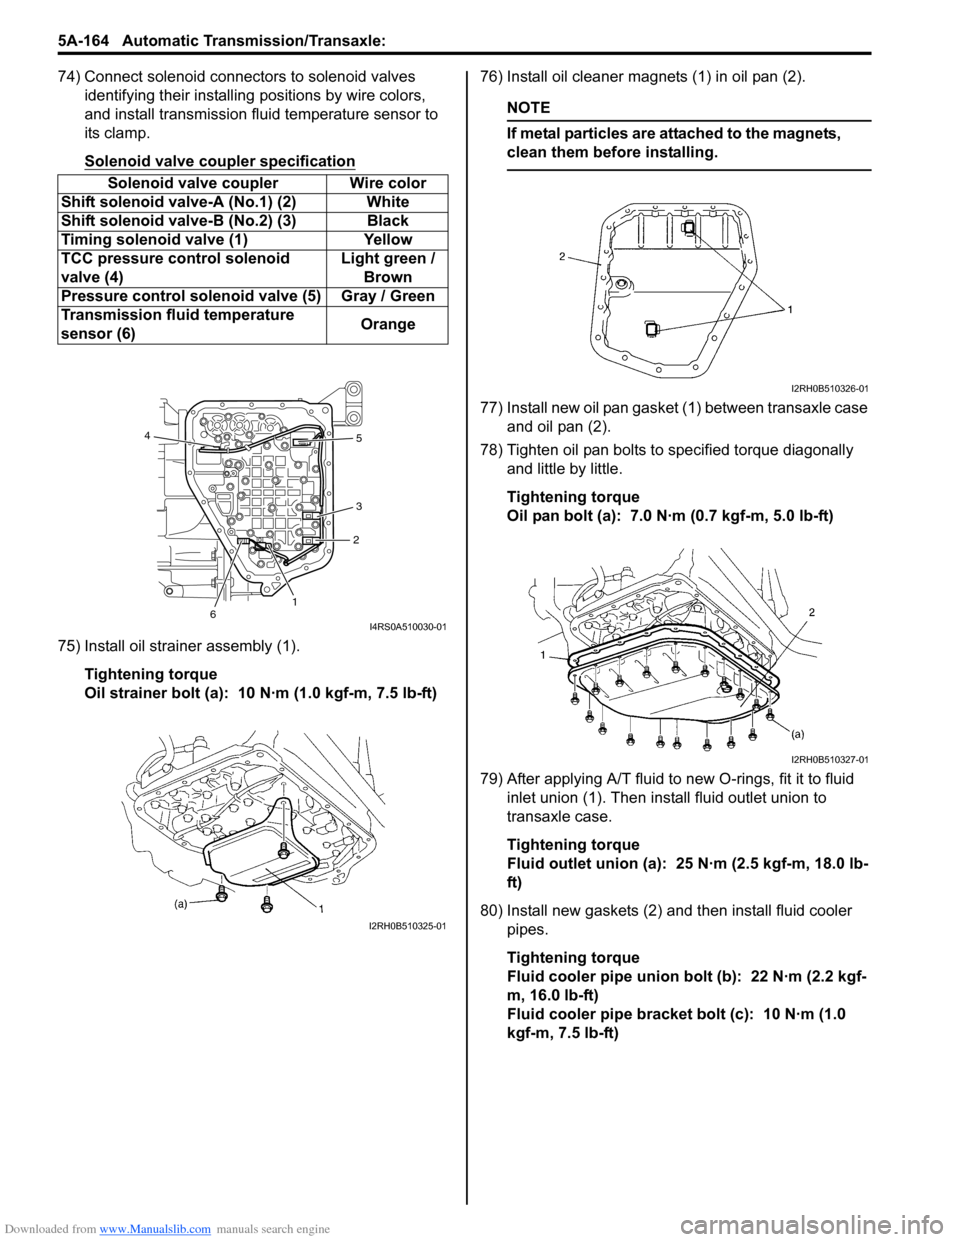 SUZUKI SWIFT 2006 2.G Service Workshop Manual Downloaded from www.Manualslib.com manuals search engine 5A-164 Automatic Transmission/Transaxle: 
74) Connect solenoid connectors to solenoid valves identifying their installing  positions by wire co